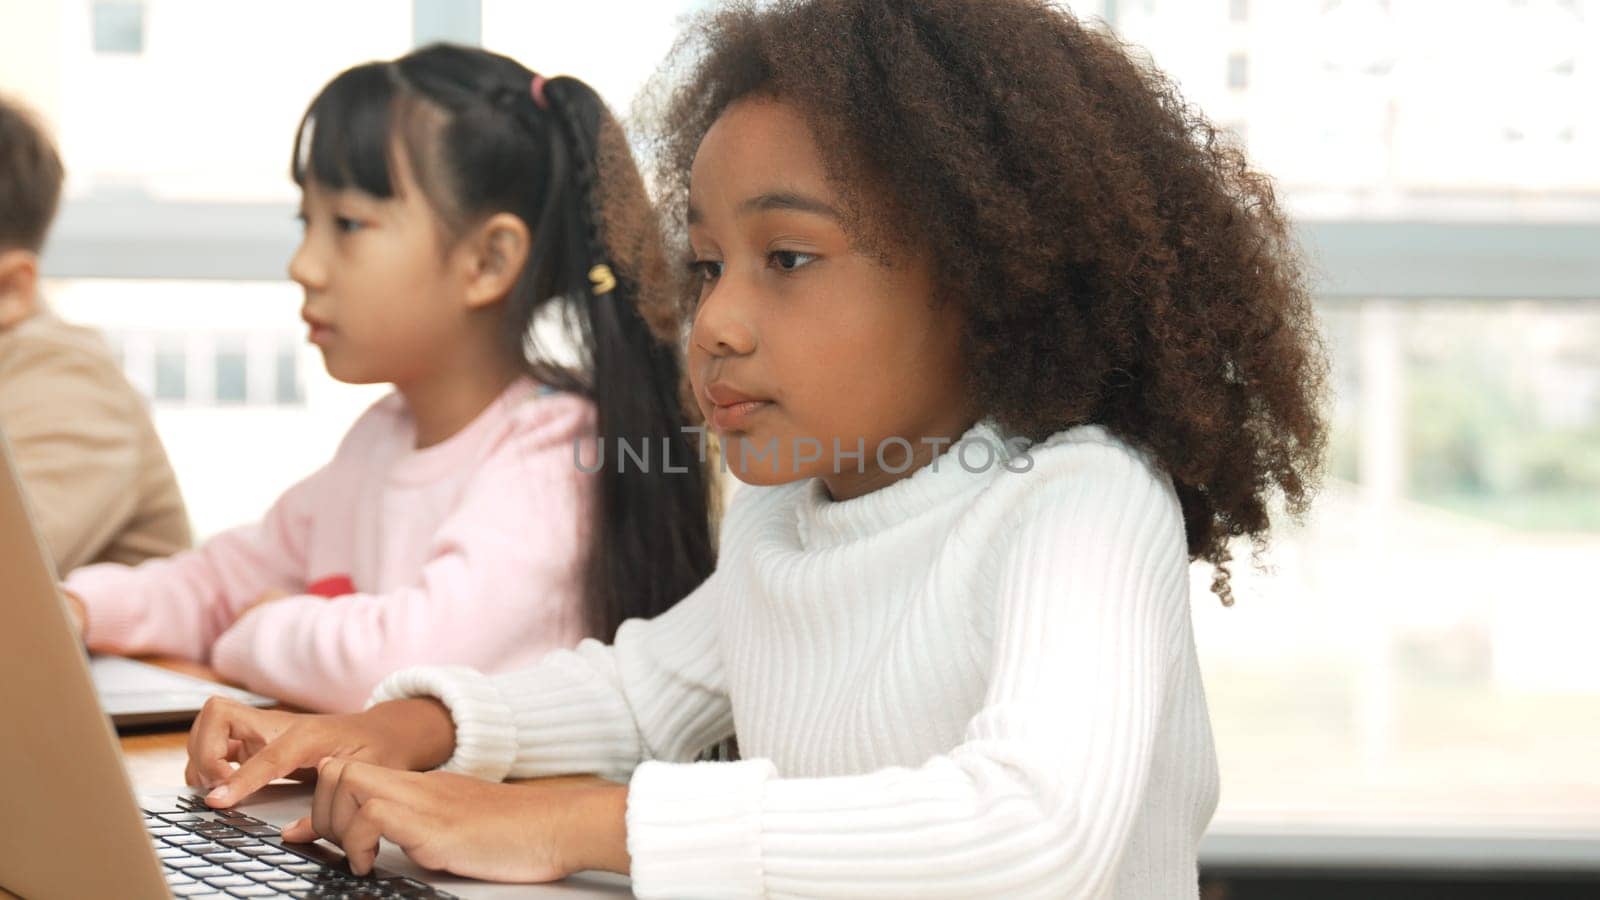 African girl play laptop with diverse friend learning prompt at STEM technology class. Multicultural student study about engineering code and programing system with blurring background. Erudition.